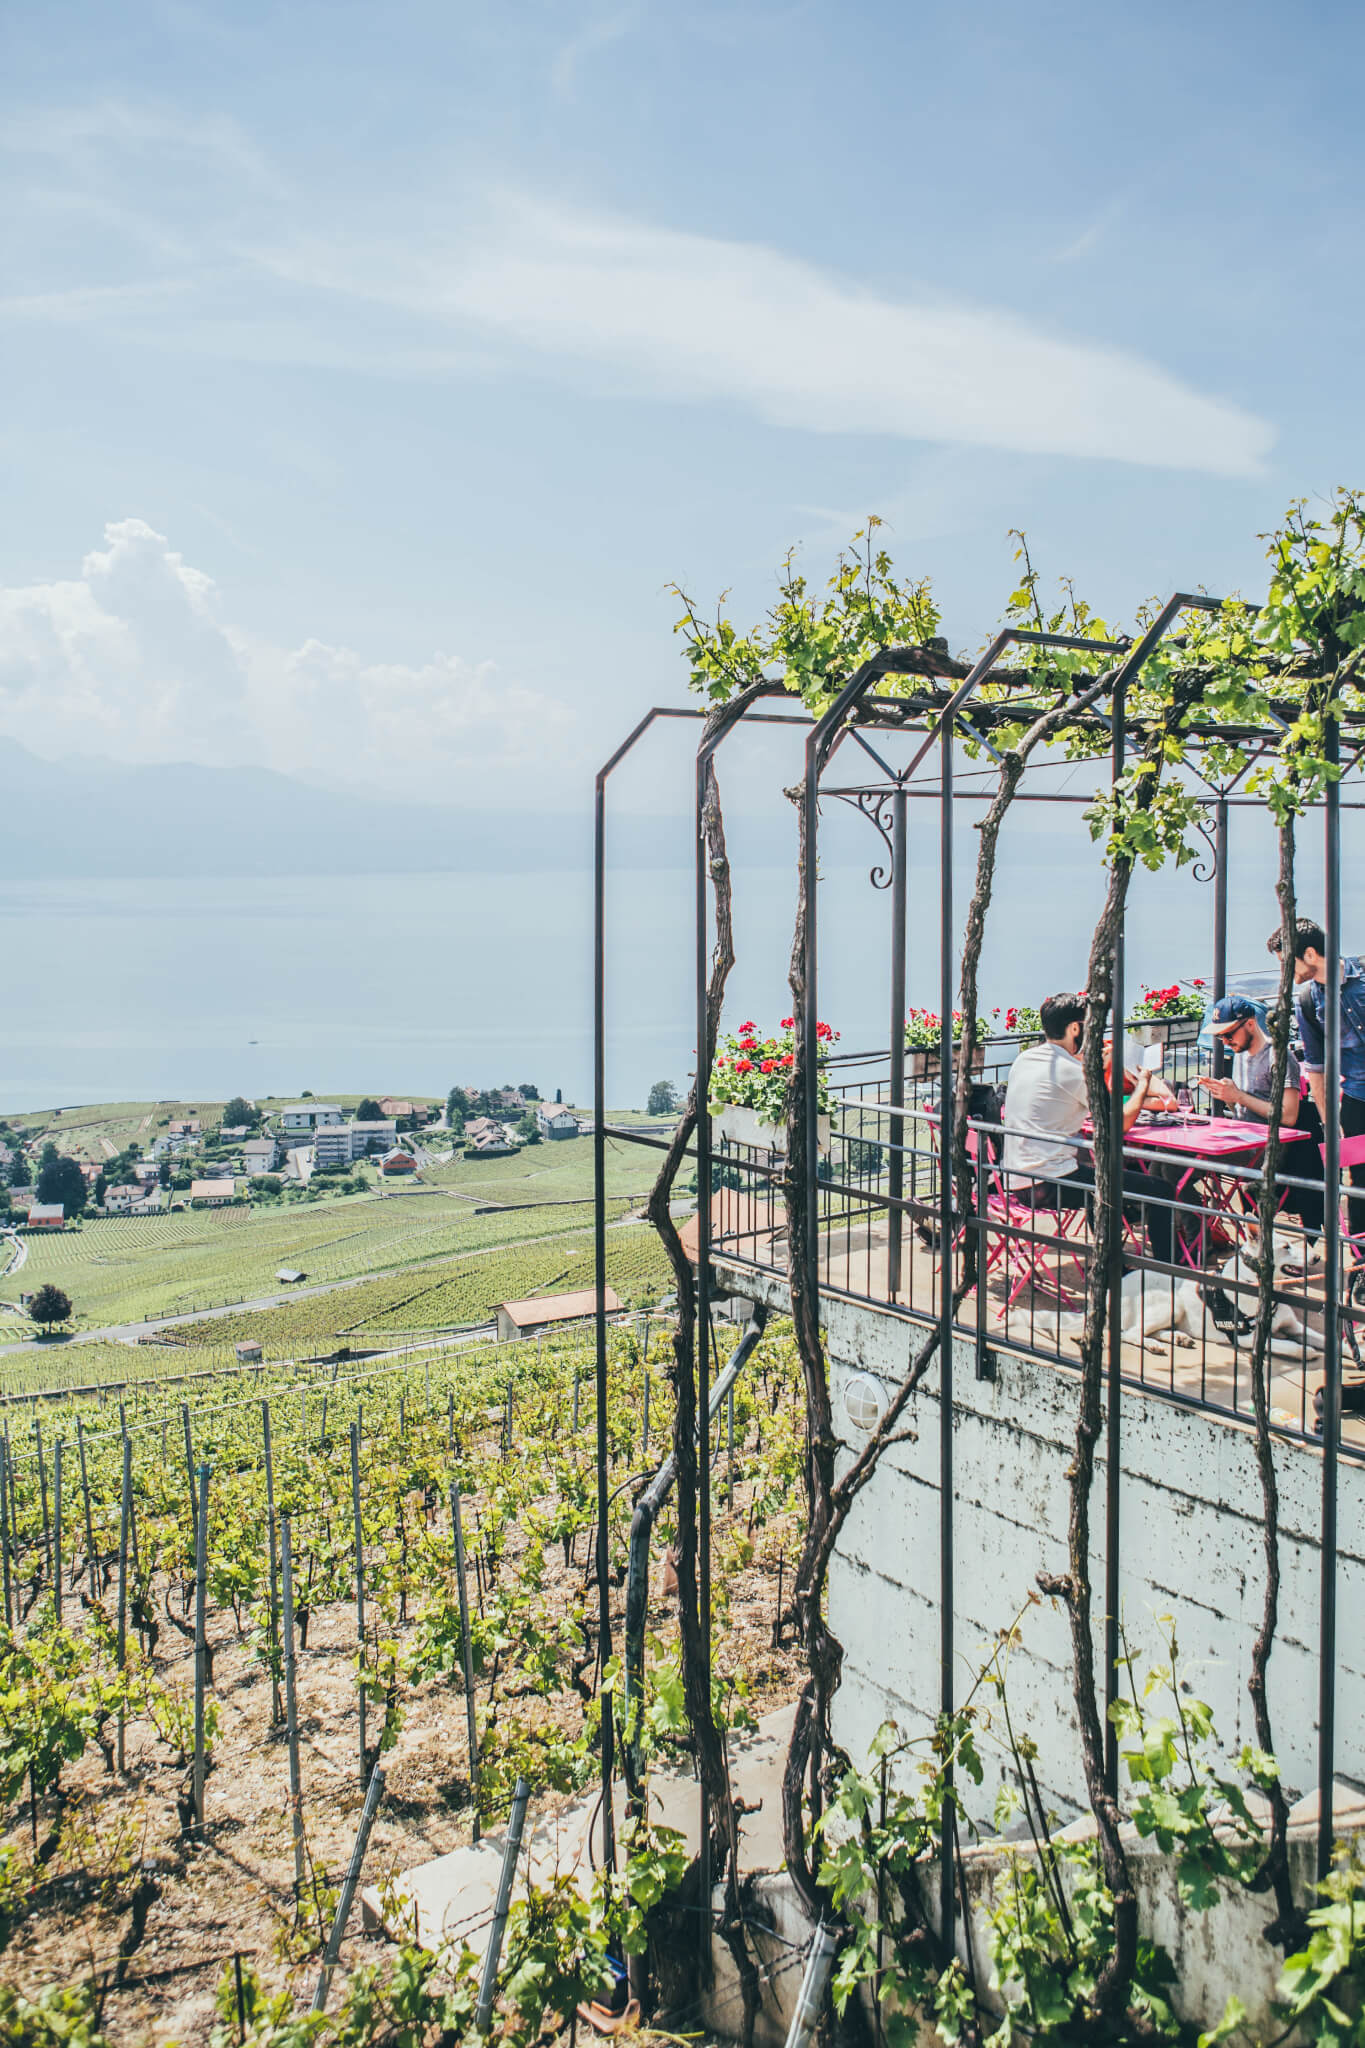 What-to-do-in-Laussane-23-of-51 Lausanne Switzerland: First time visit must do's